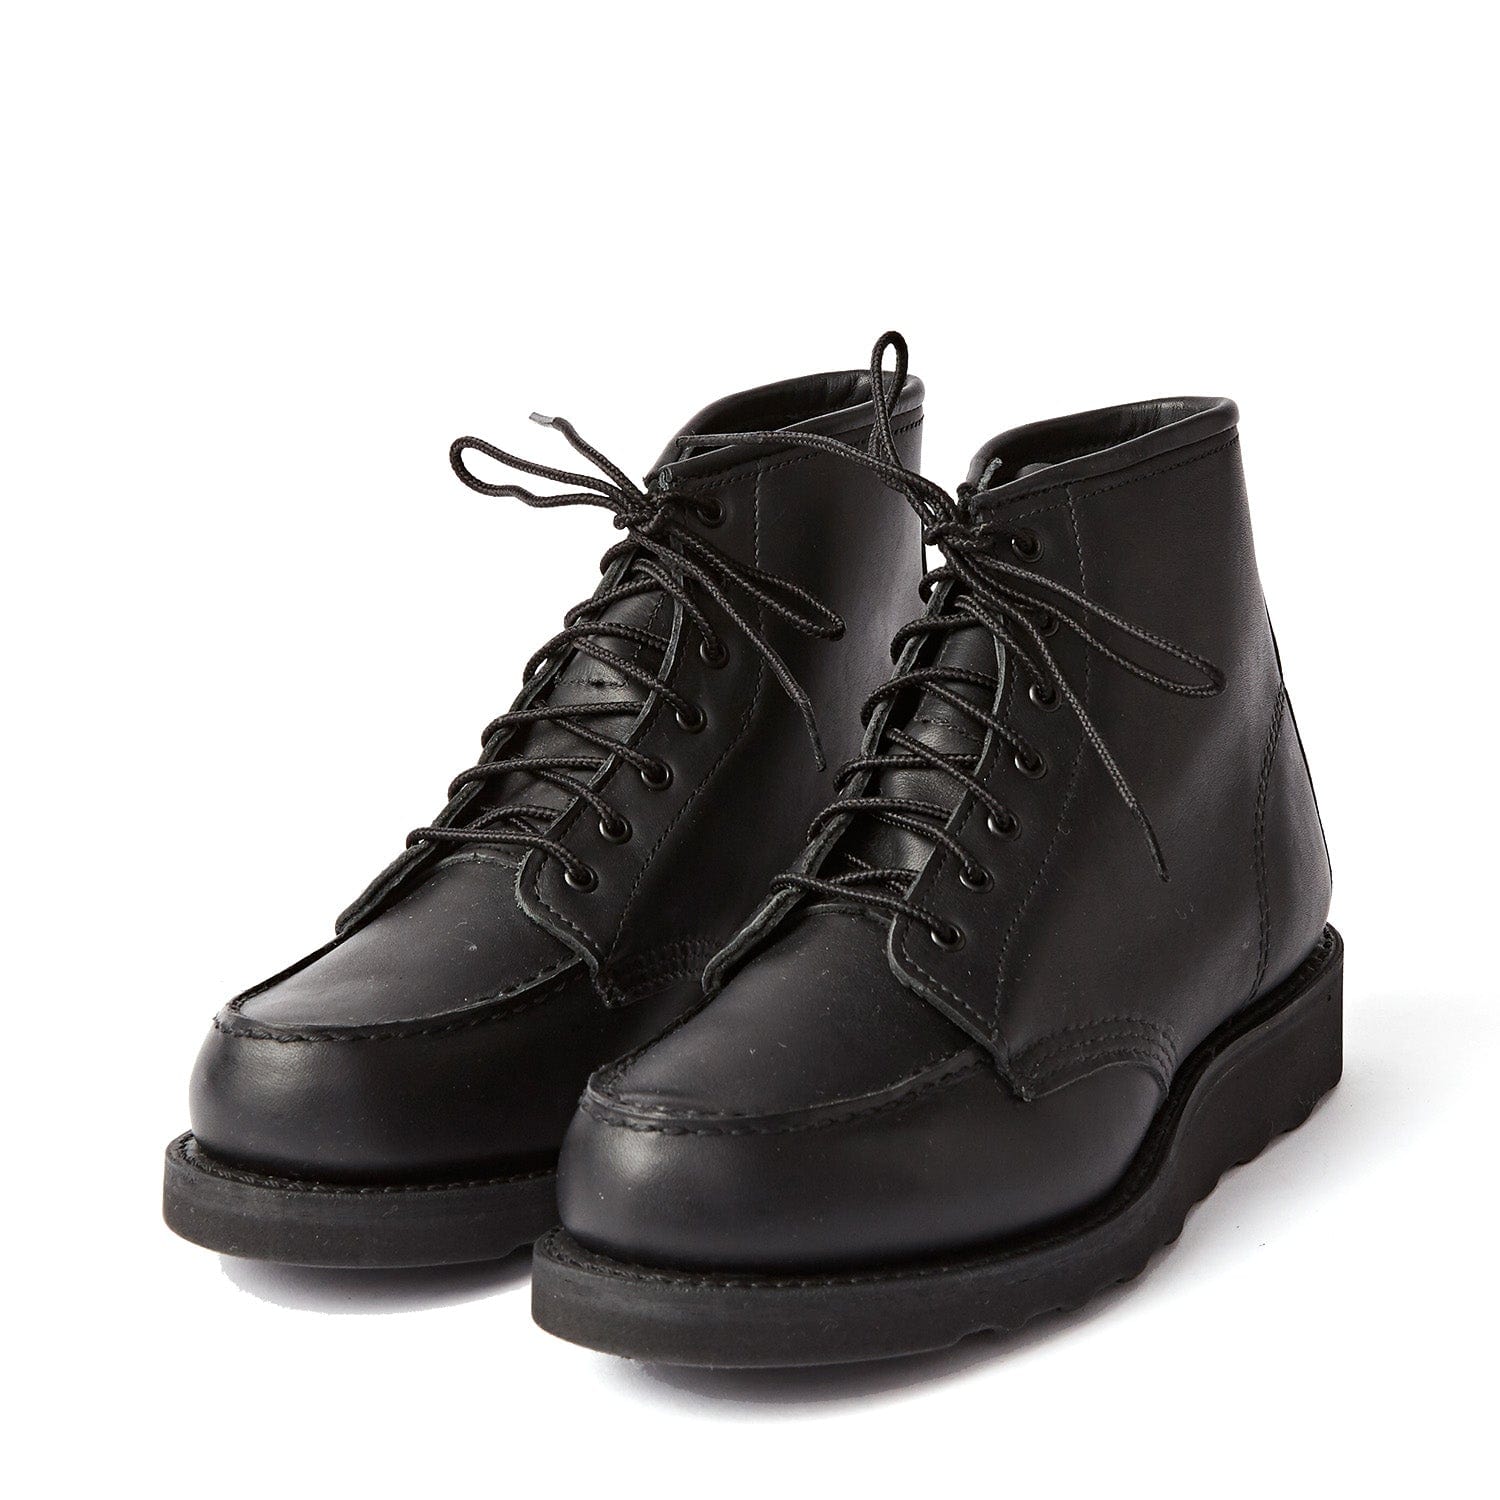 red wing moc toe all black